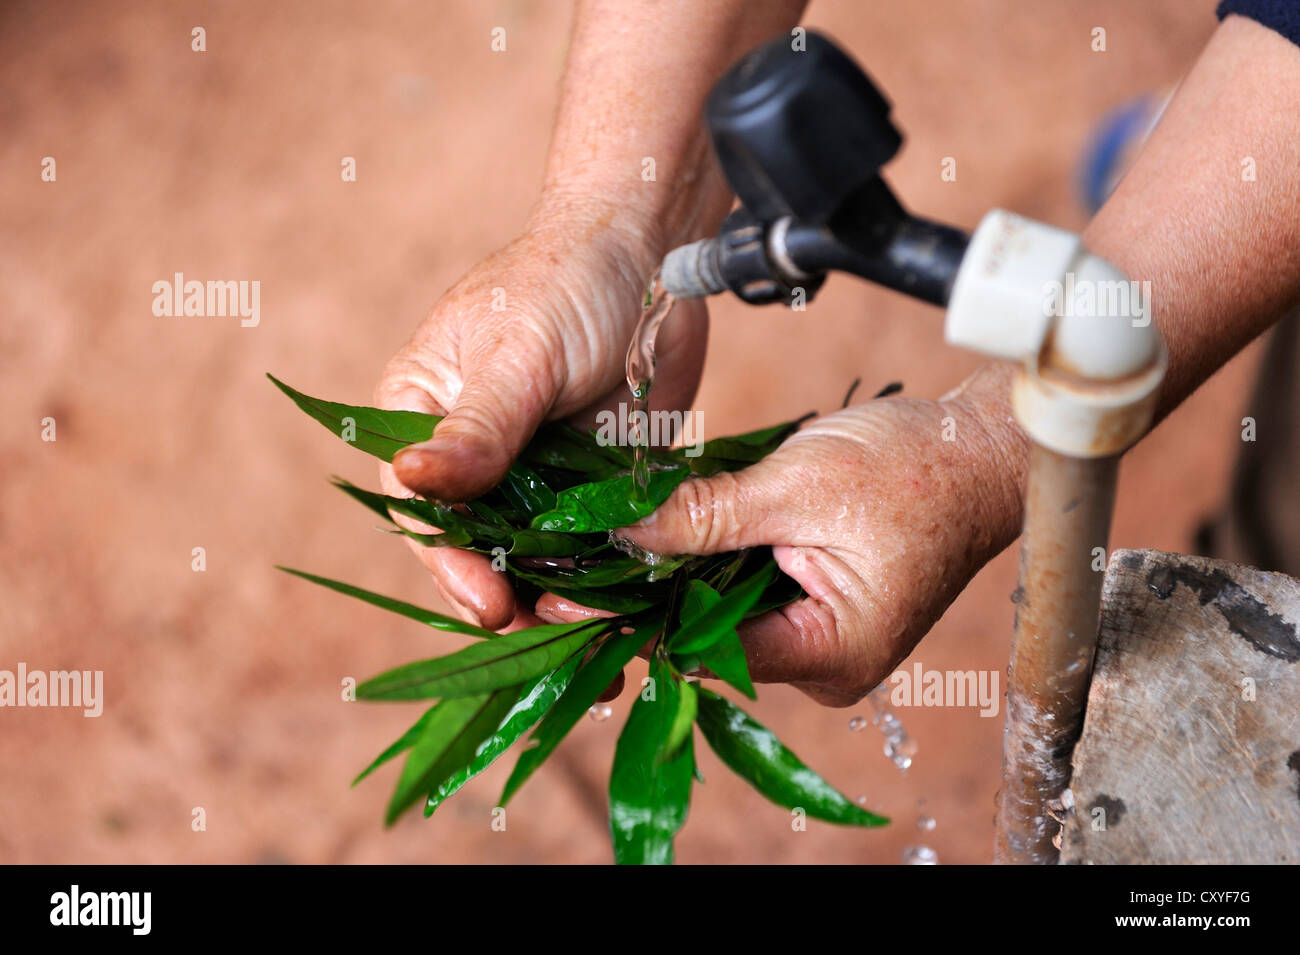 Health promoter washing leaves from which she will make a beverage containing metamizole for pain relief, natural medicine Stock Photo